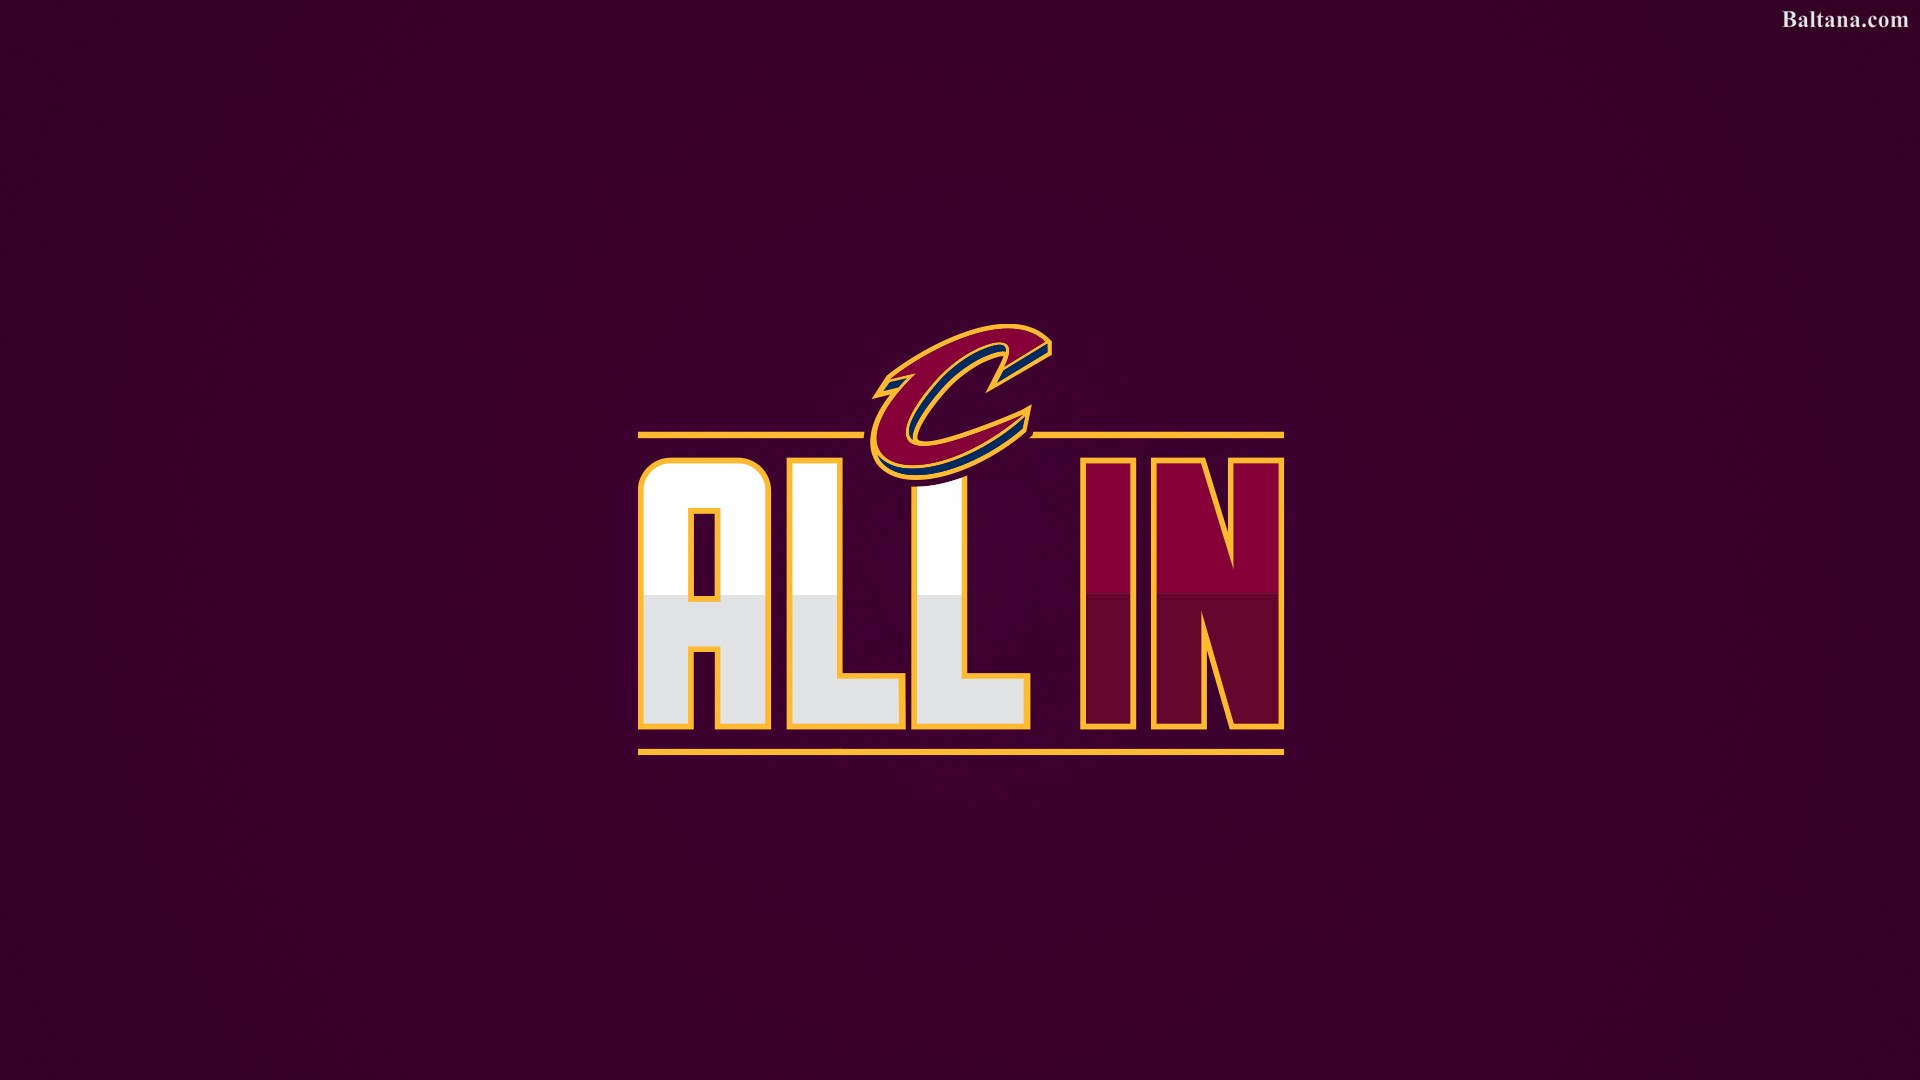 Cleveland Cavaliers Background Hd Wallpapers - Cleveland Cavaliers Wallpaper 2019 - HD Wallpaper 